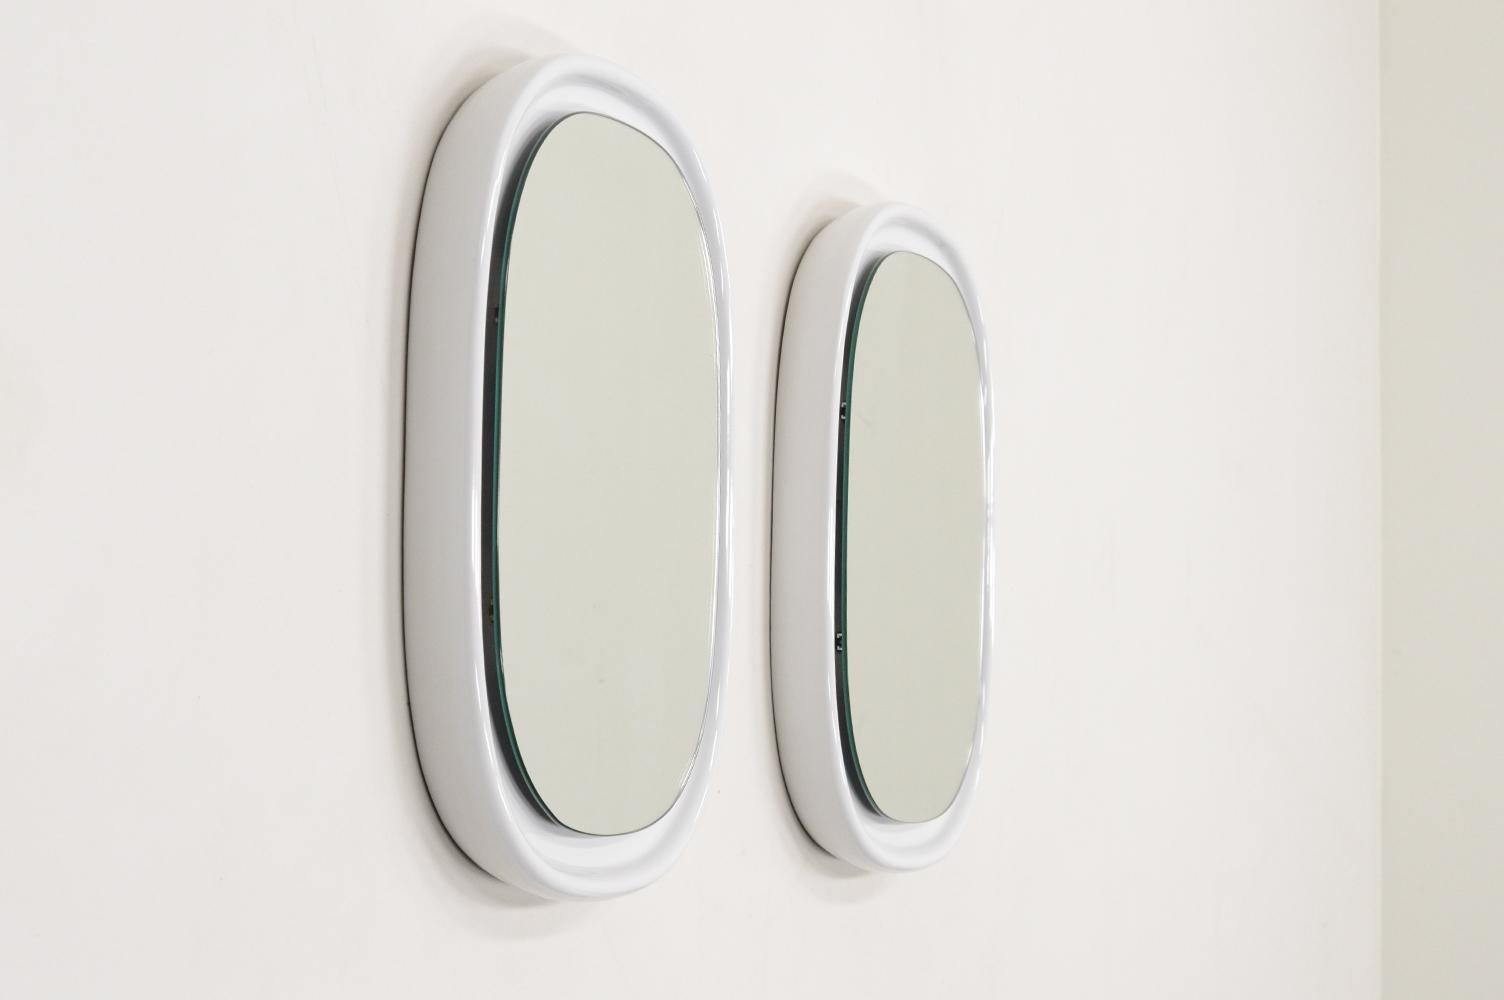 Mid-Century Modern Set of 2 white ceramic mirrors by Sphinx Holland, 1970s Netherlands.  For Sale